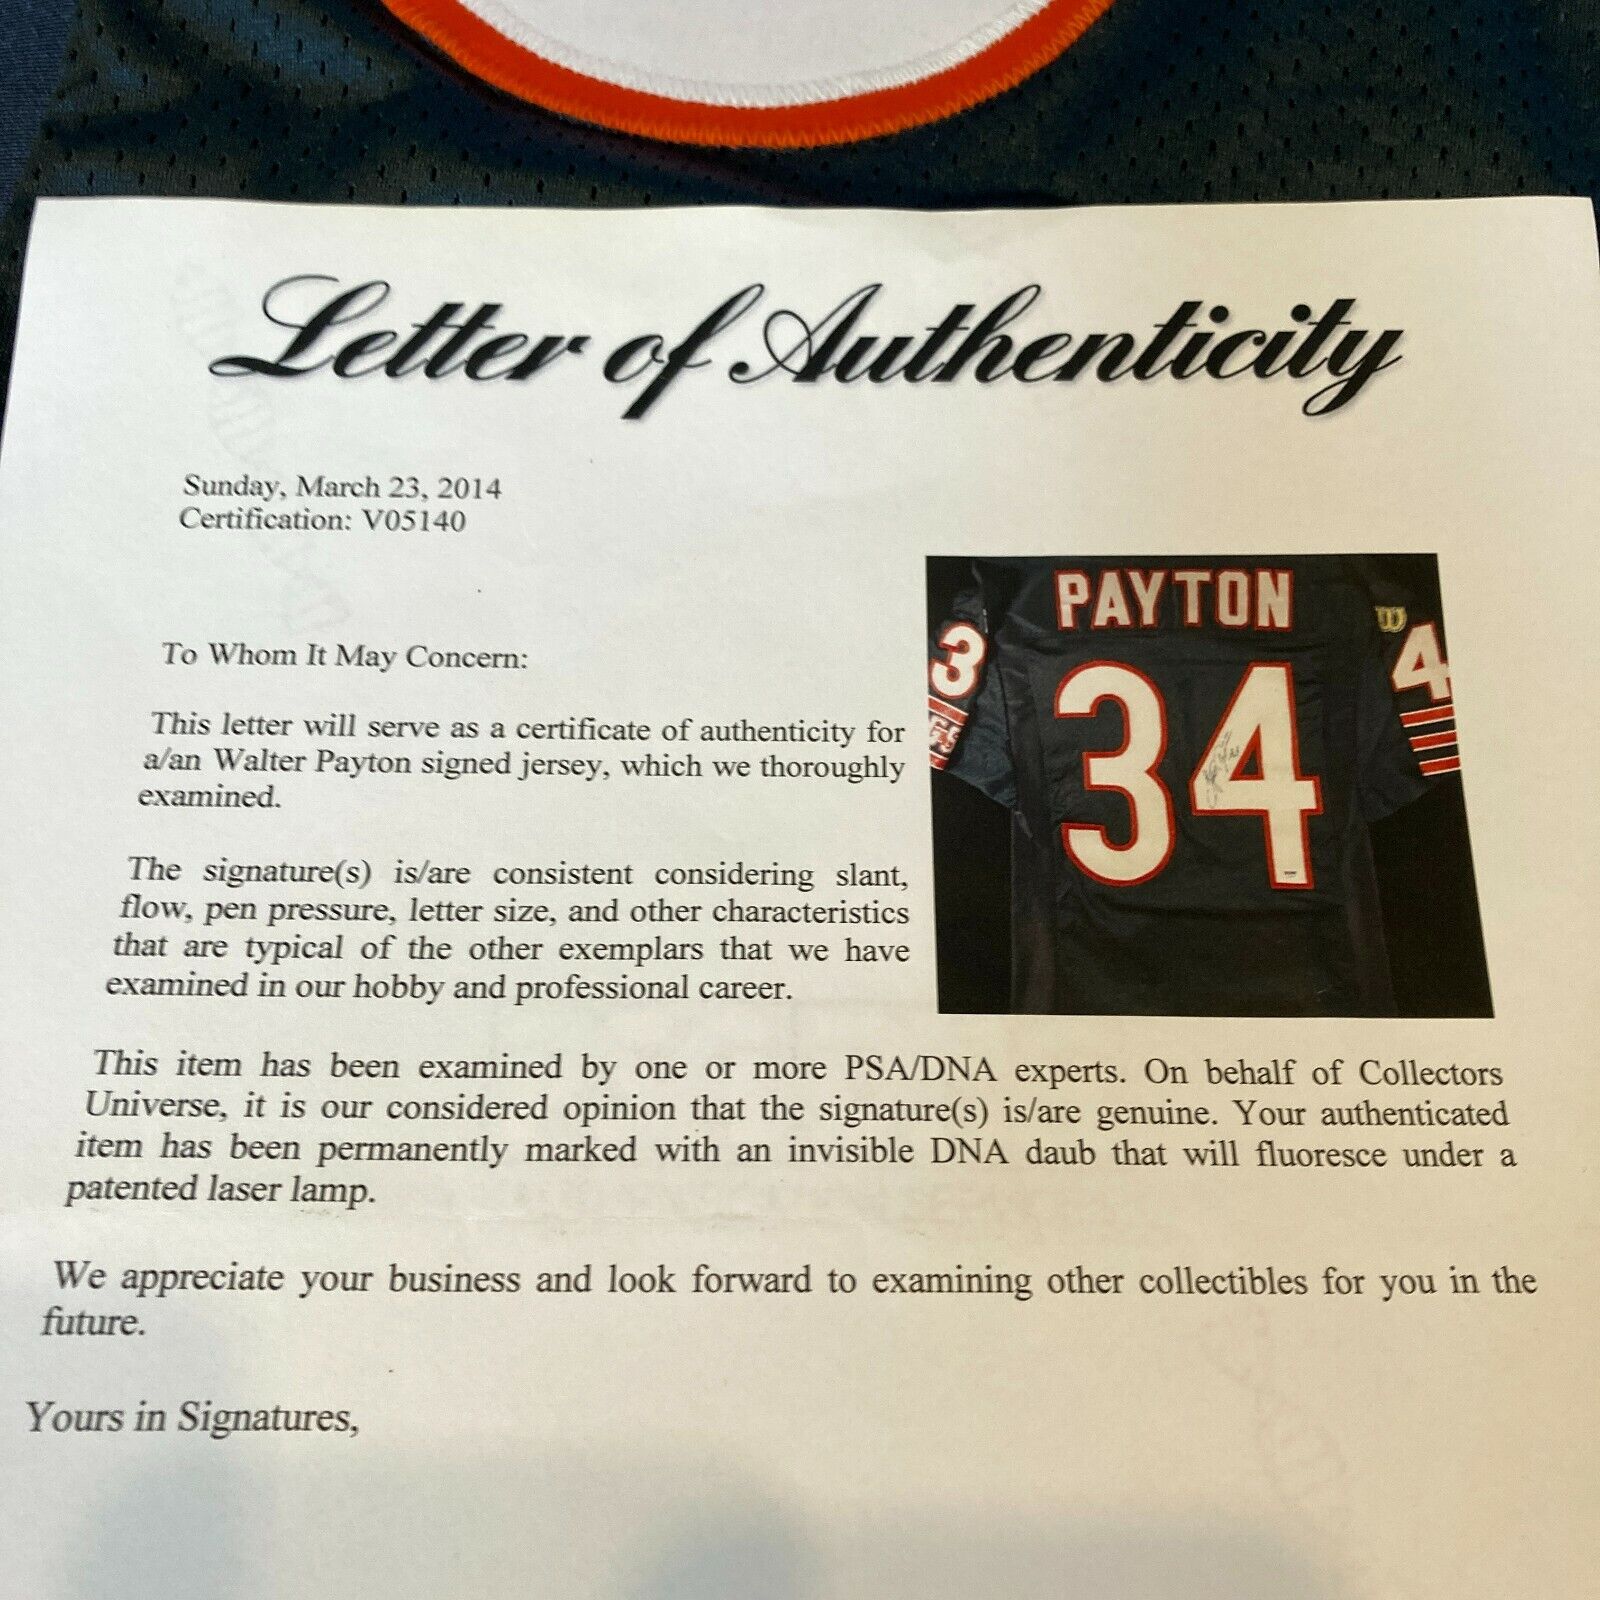 Walter Payton Autographed Jersey